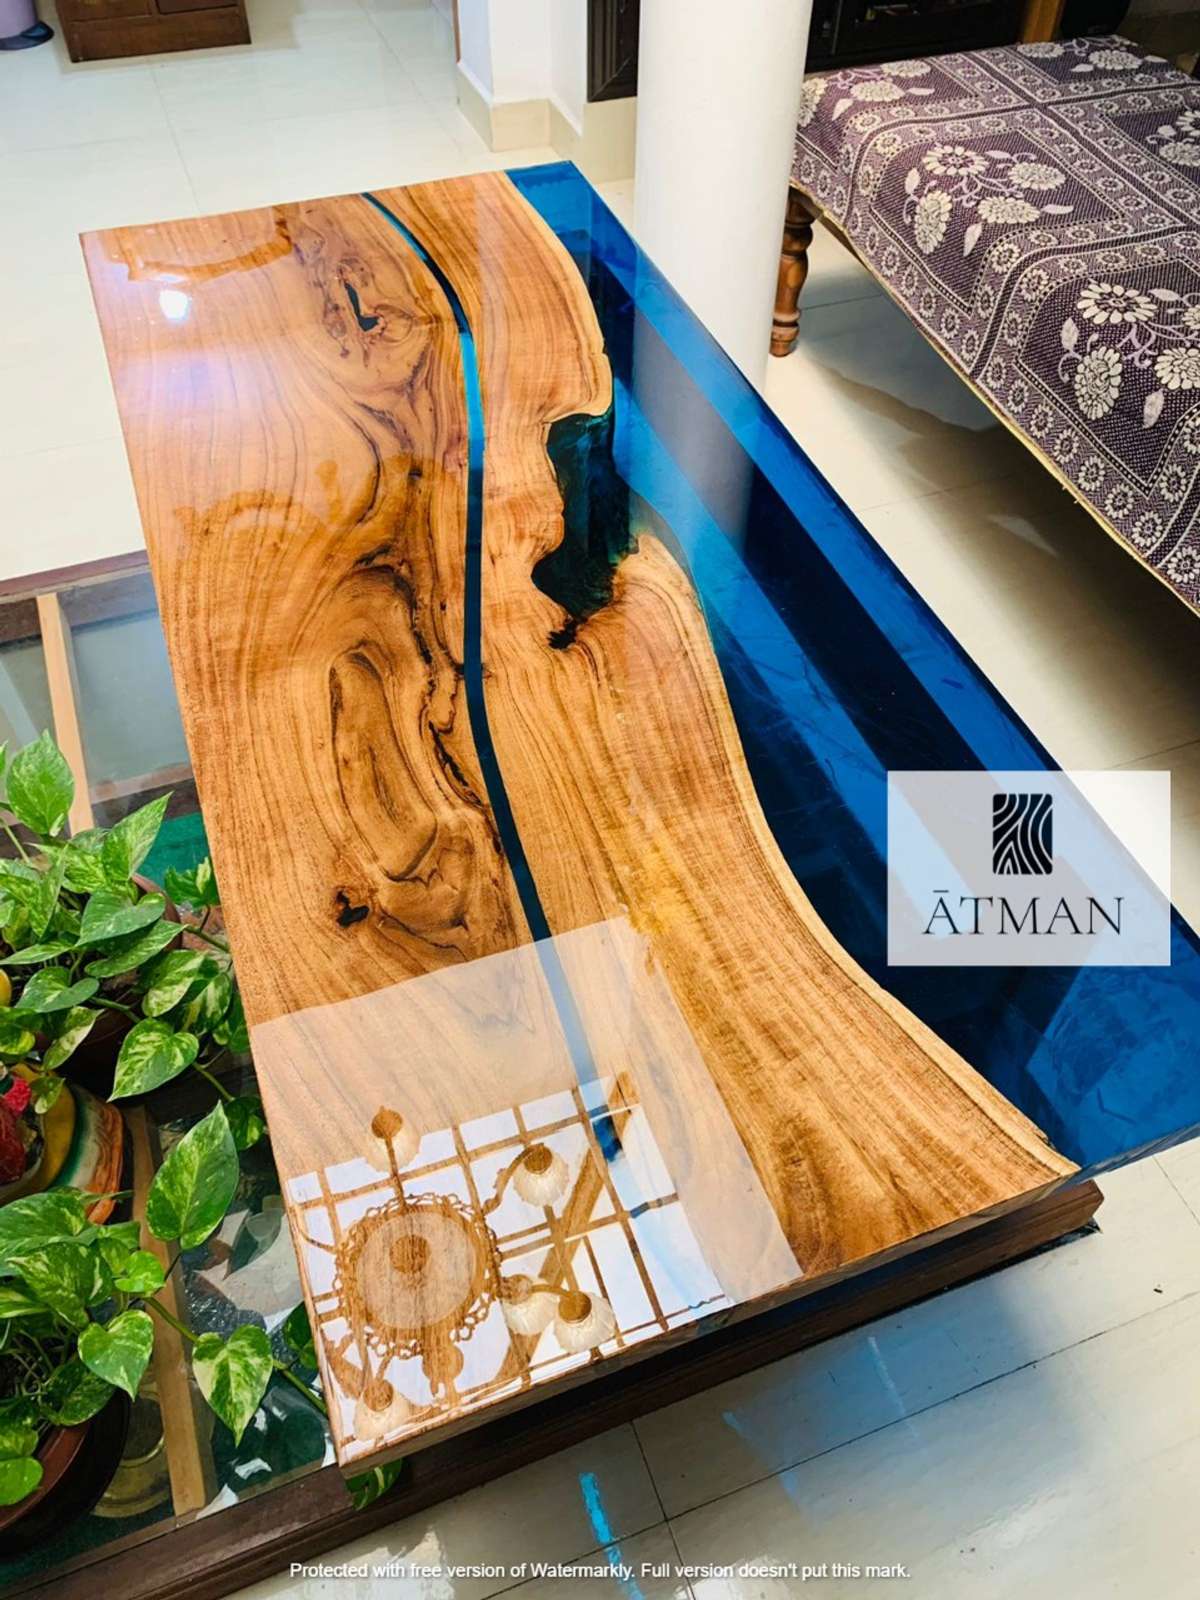 40-year old Asian Walnut with a deep blue pigment finished to a high mirror-like gloss Resin custom made to a size of 4.5 feet x 2 feet with powder coated black frames.  

#epoxytables
#LivingroomDesigns  #LivingRoomTable  #CoffeeTable  #HomeDecor  #customisedfurniture  #DiningTable #InteriorDesigner #keraladesigns